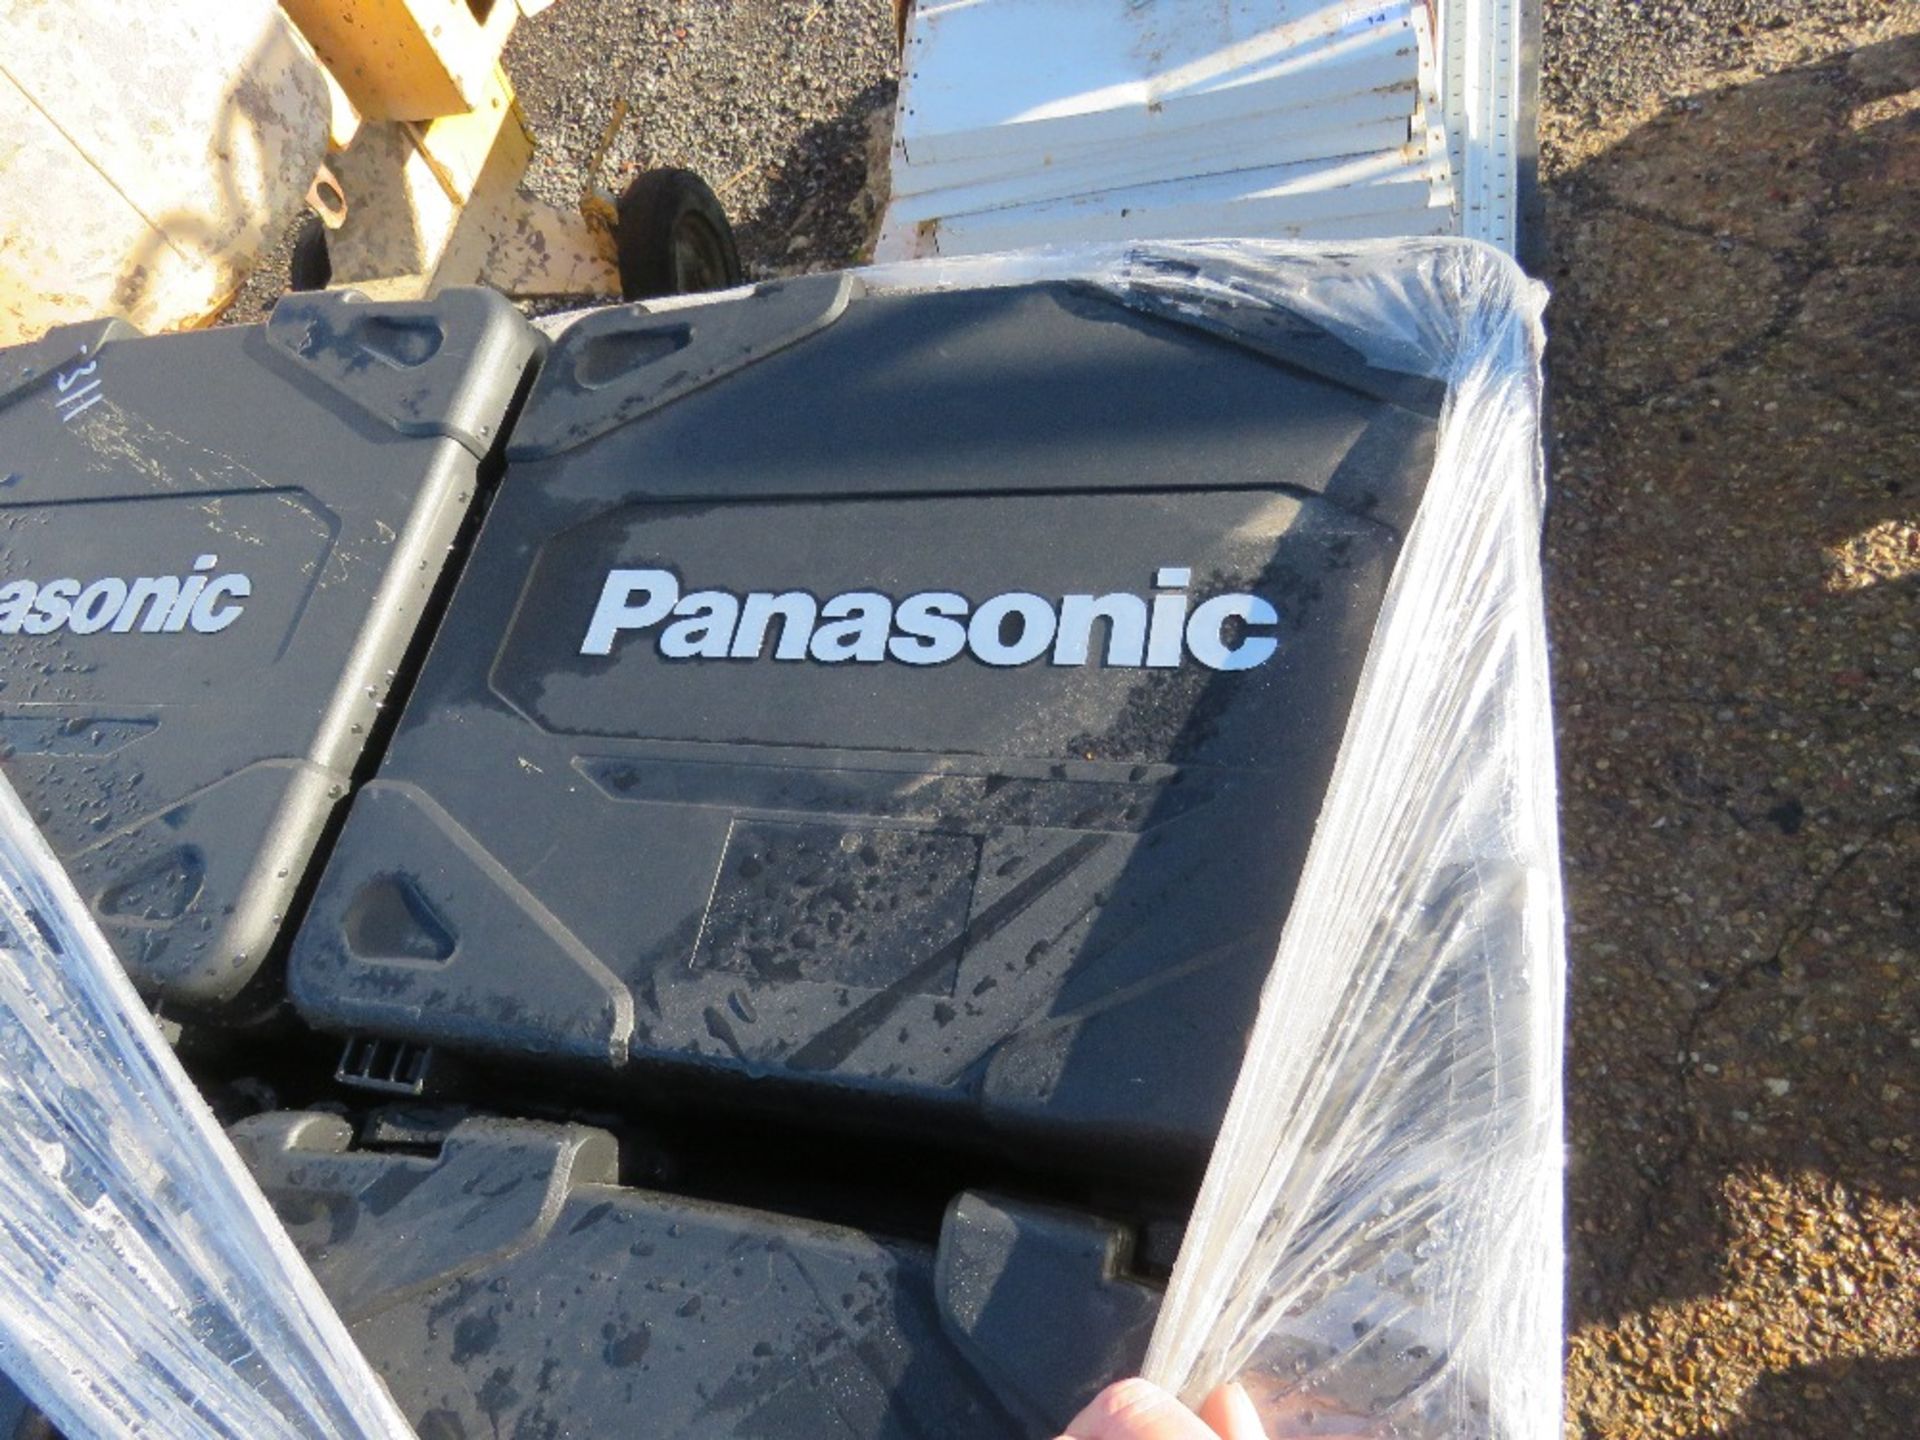 LARGE PALLET OF EMPTY PANASONIC POWER TOOL BOXES, APPEAR UNUSED. - Image 2 of 2